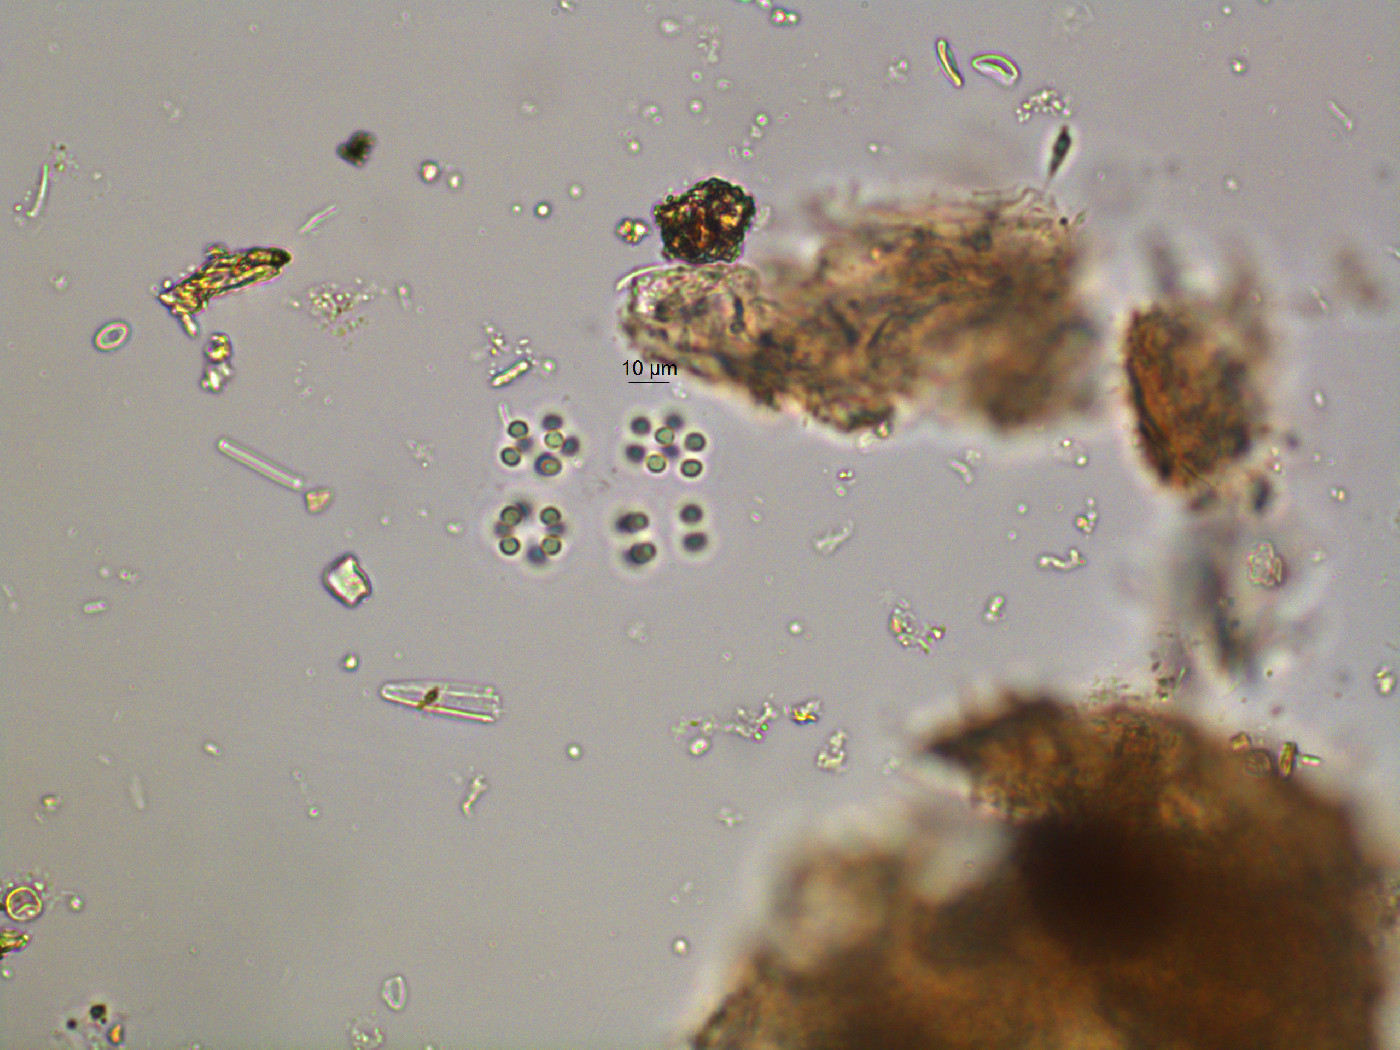 Chroococcus limneticus image